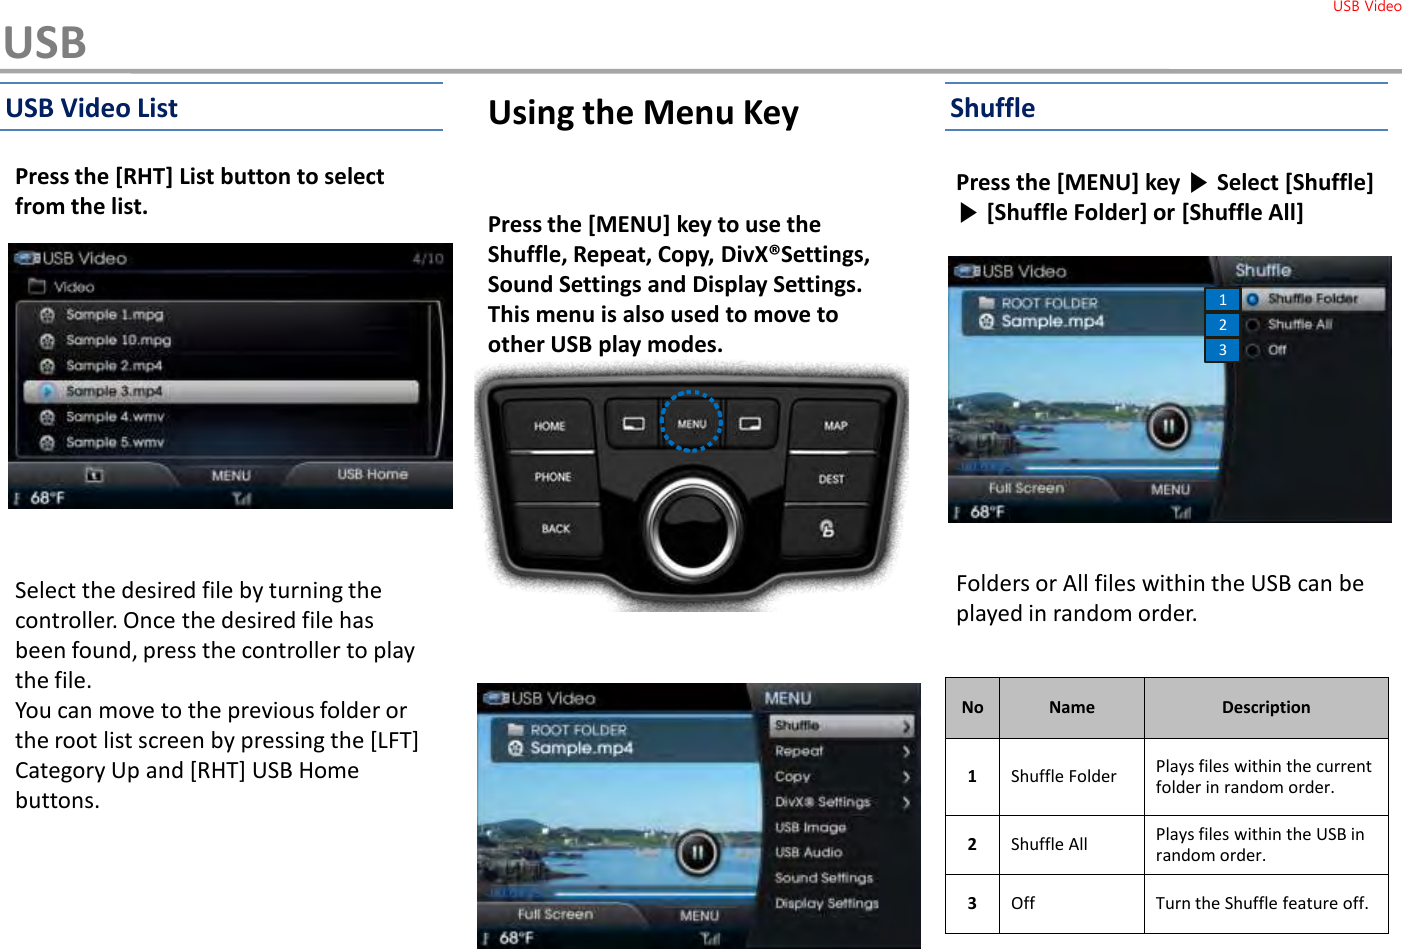 Press the [MENU] key to use the Shuffle, Repeat, Copy, DivX®Settings, Sound Settings and Display Settings. This menu is also used to move to other USB play modes.Press the [MENU] key ▶Select [Shuffle] ▶[Shuffle Folder] or [Shuffle All]Using the Menu Key12No Name Description1Shuffle Folder Plays files within the current folder in random order.2Shuffle All Plays files within the USB in random order.3Off Turn the Shuffle feature off.USB Video List Shuffle3Folders or All files within the USB can be played in random order.USBPress the [RHT] List button to select from the list. Select the desired file by turning the controller. Once the desired file has been found, press the controller to play the file.You can move to the previous folder or the root list screen by pressing the [LFT] Category Up and [RHT] USB Home buttons.USB Video